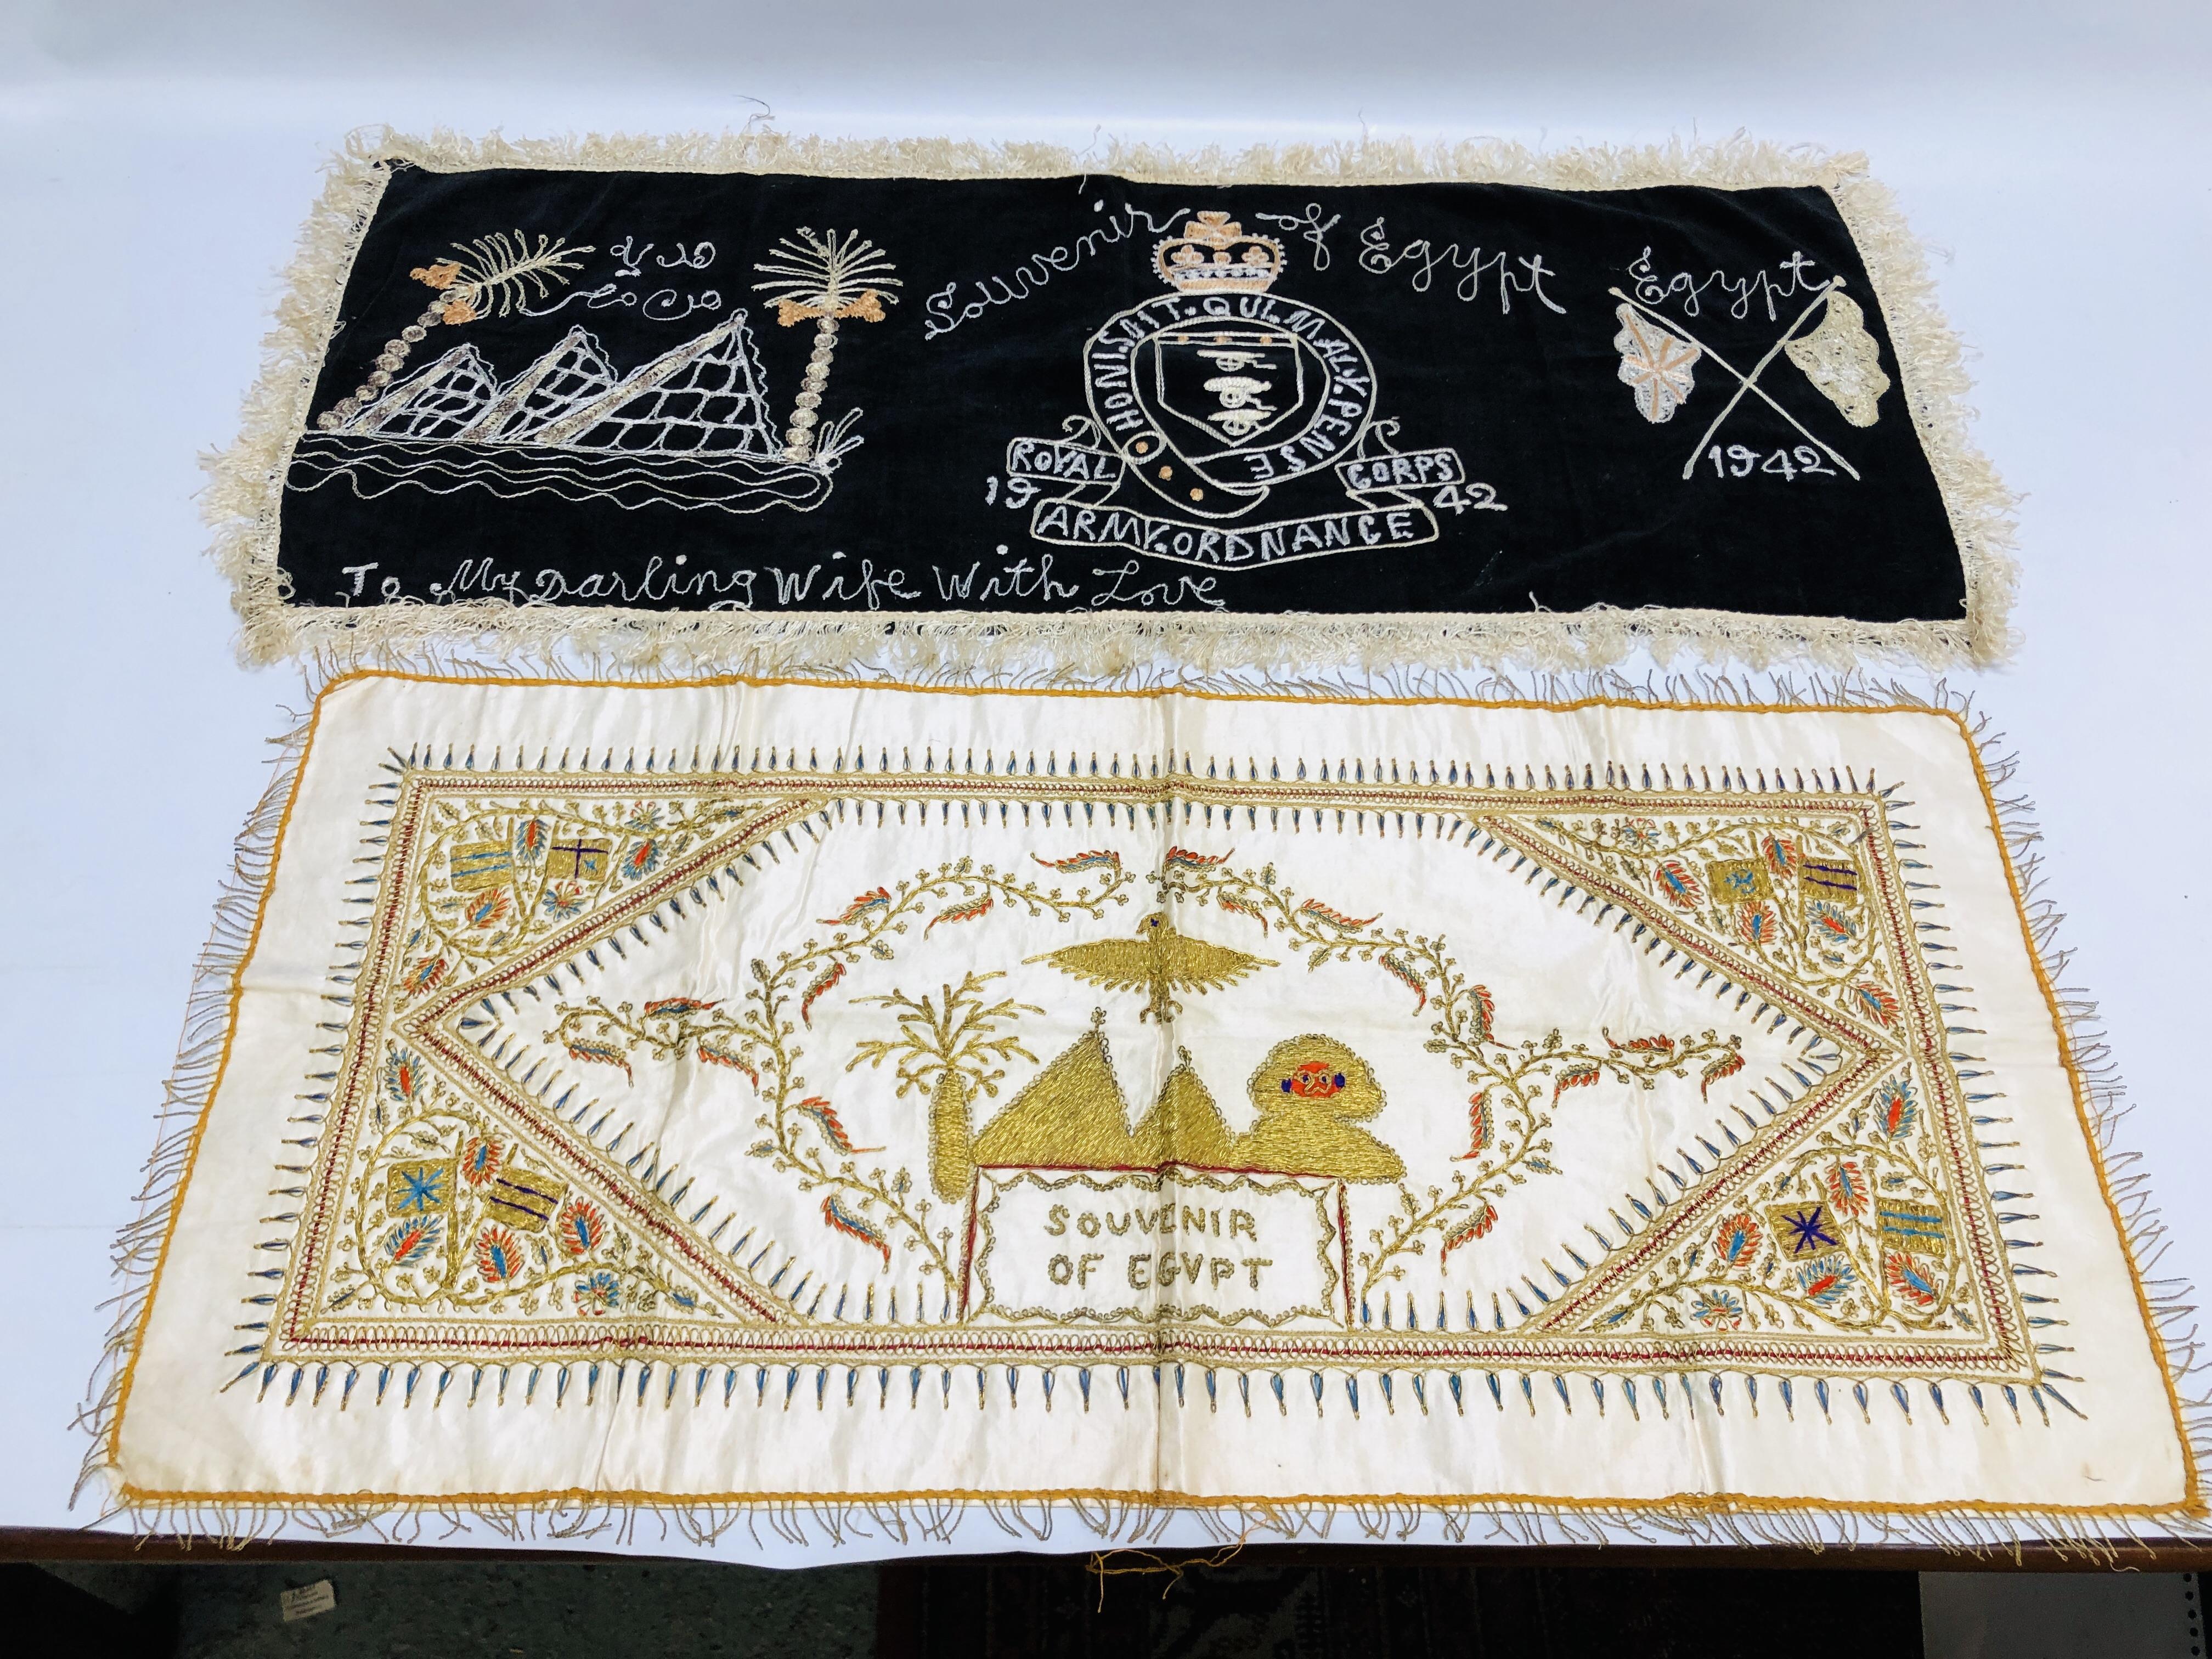 TWO SOUVENIR NEEDLEWORK PANELS, RELATING TO EGYPT, ONE INSCRIBED "ROYAL ORDNANCE...1942".